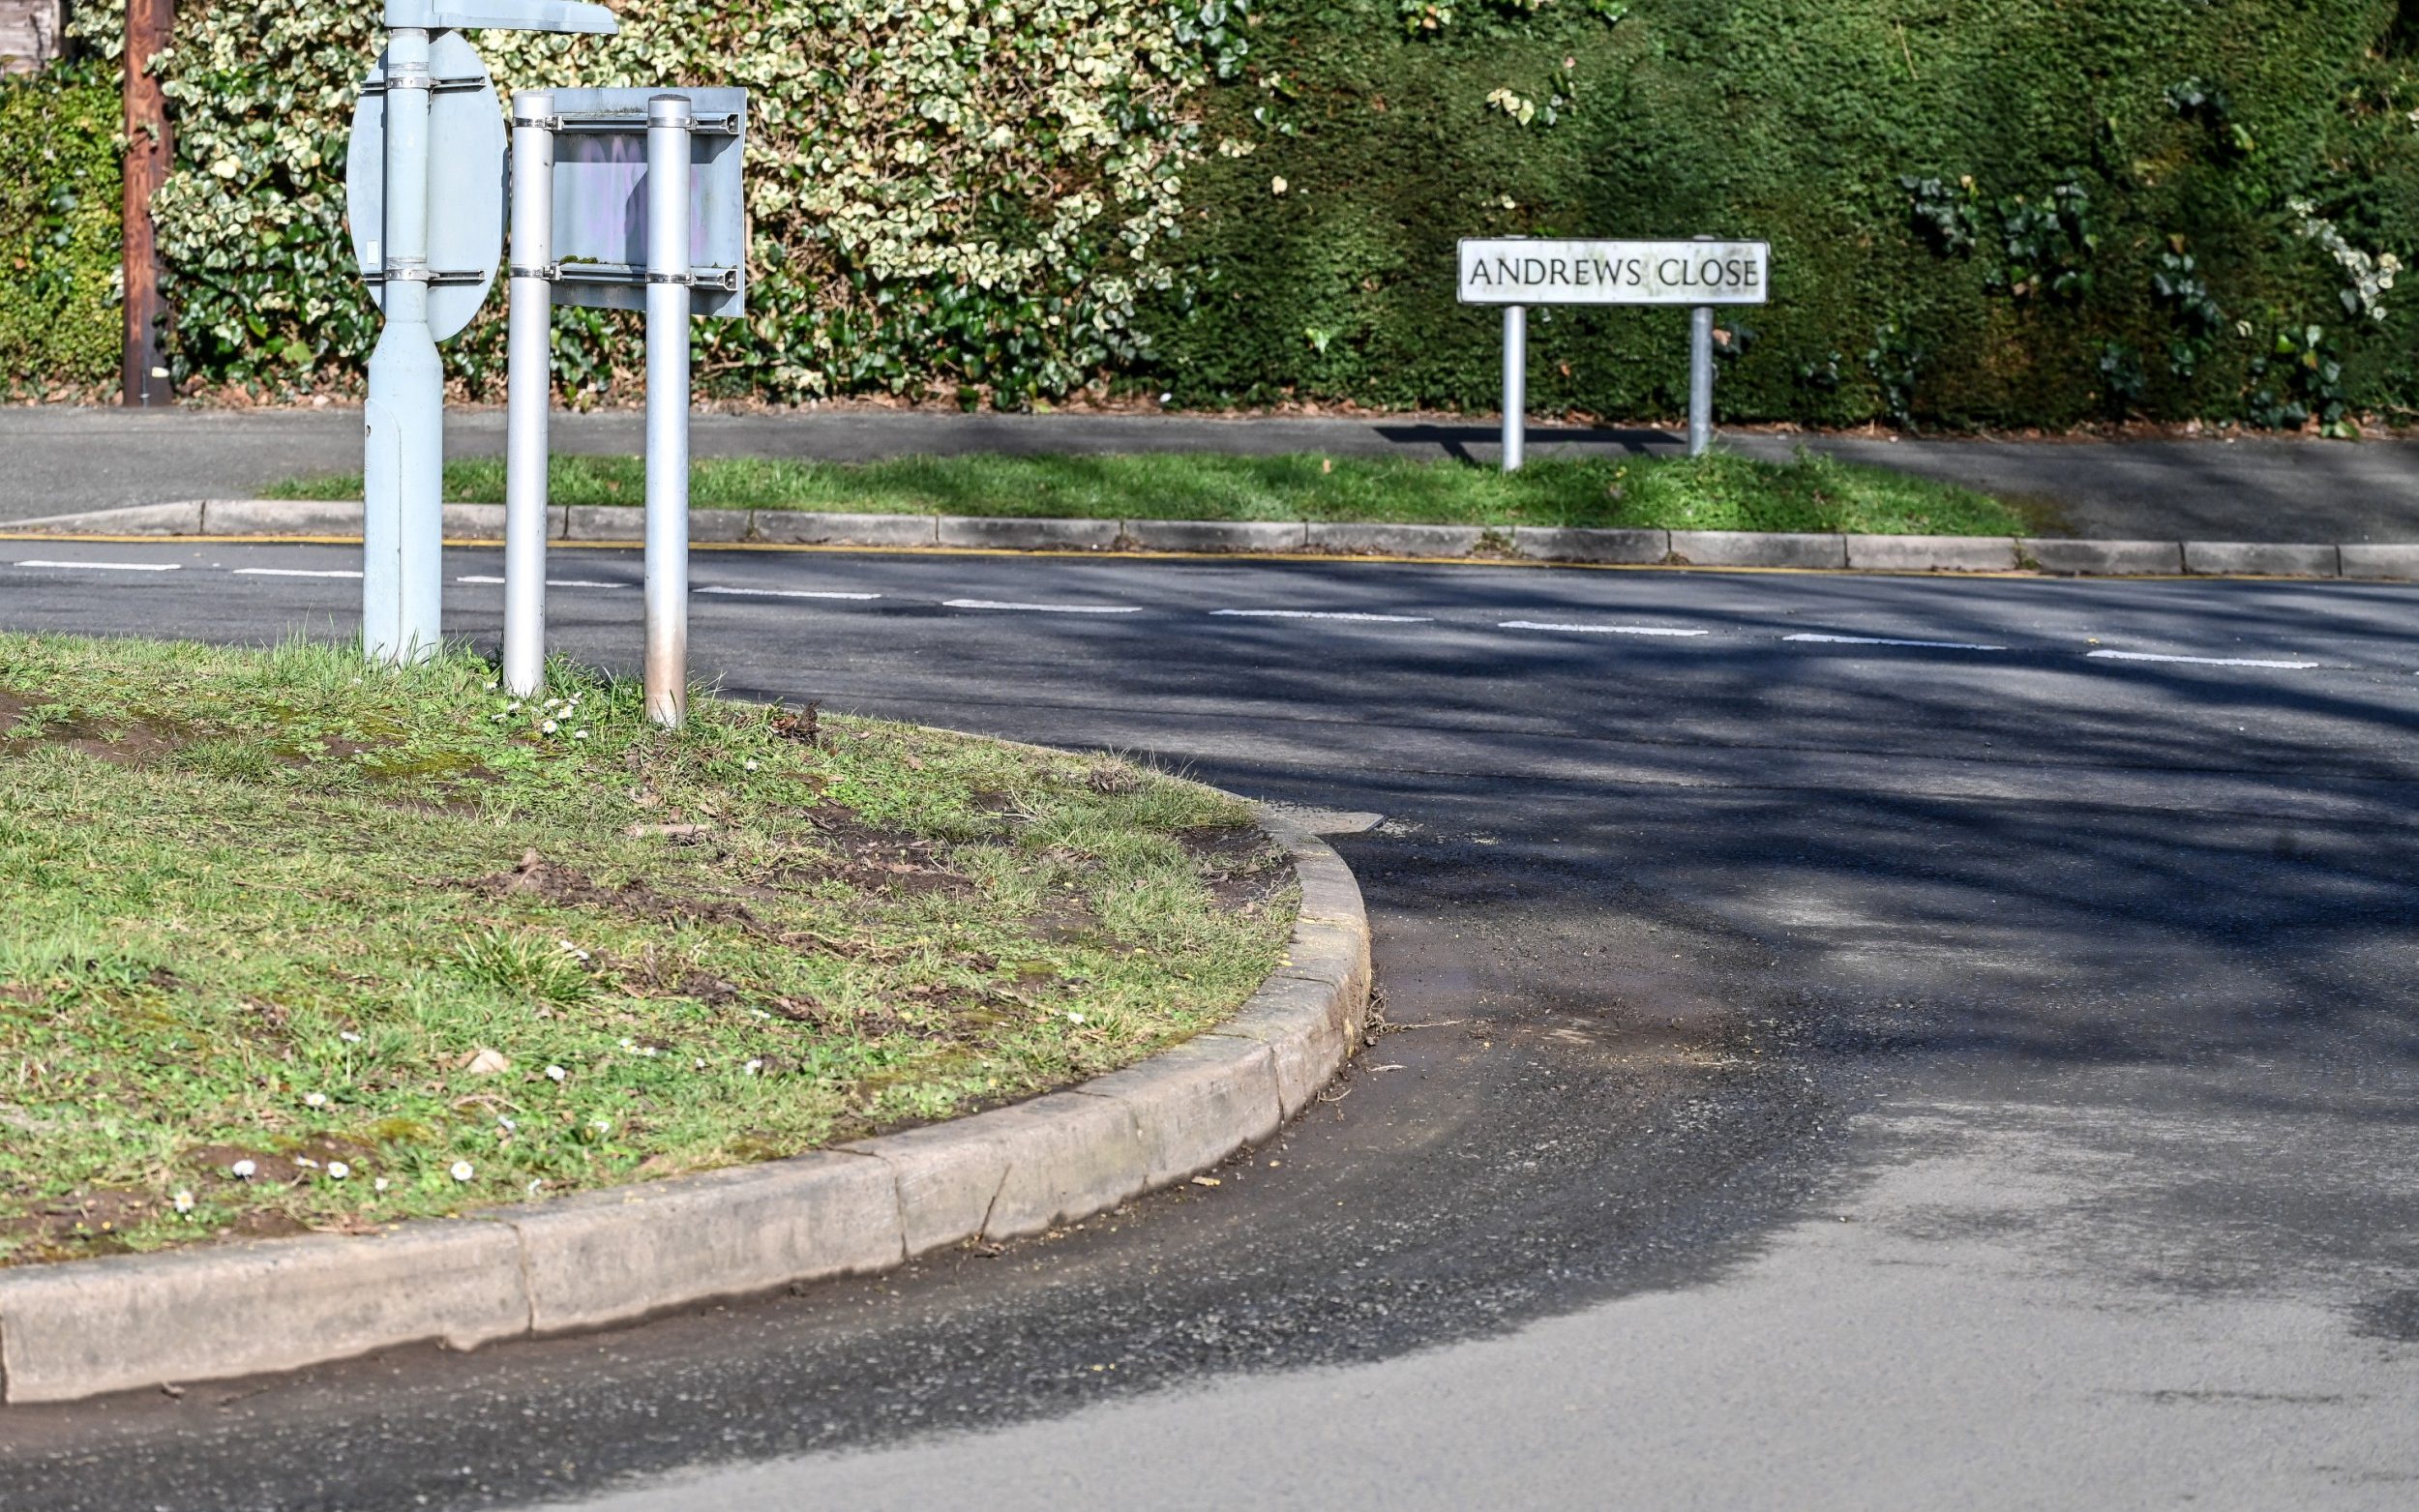 round the bend: council criticised over double yellow lines on roundabout